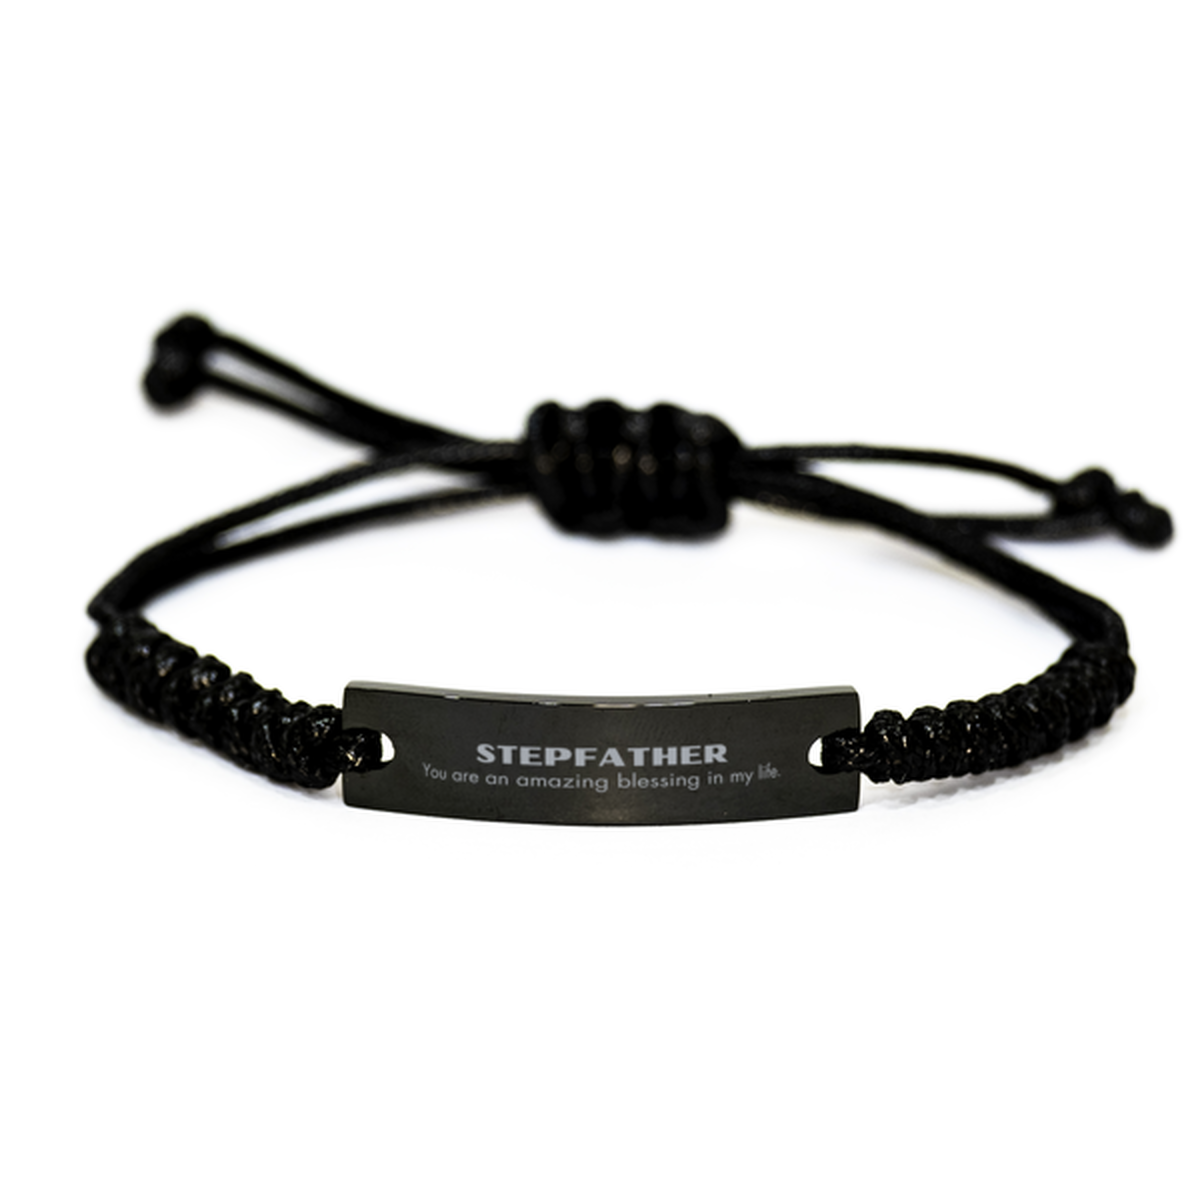 Stepfather Black Rope Bracelet, You are an amazing blessing in my life, Thank You Gifts For Stepfather, Inspirational Birthday Christmas Unique Gifts For Stepfather